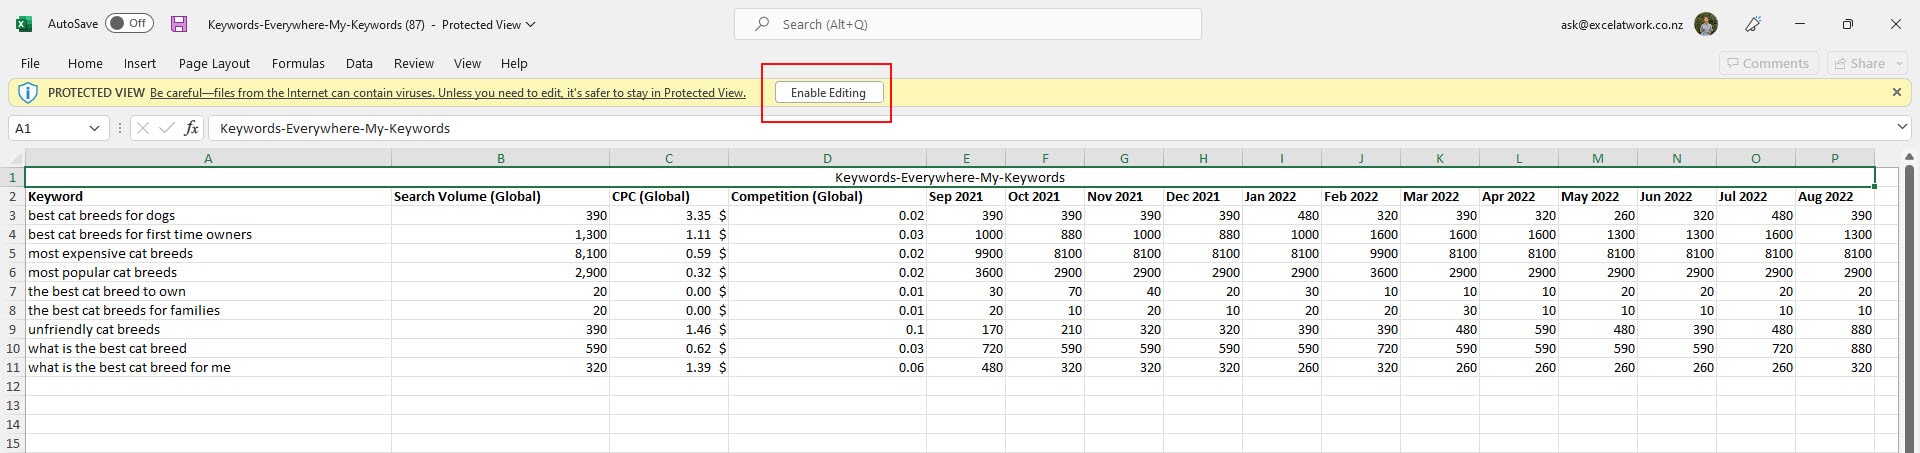 Showing where the enable editing button in Excel after opening exported Keywords Everywhere data